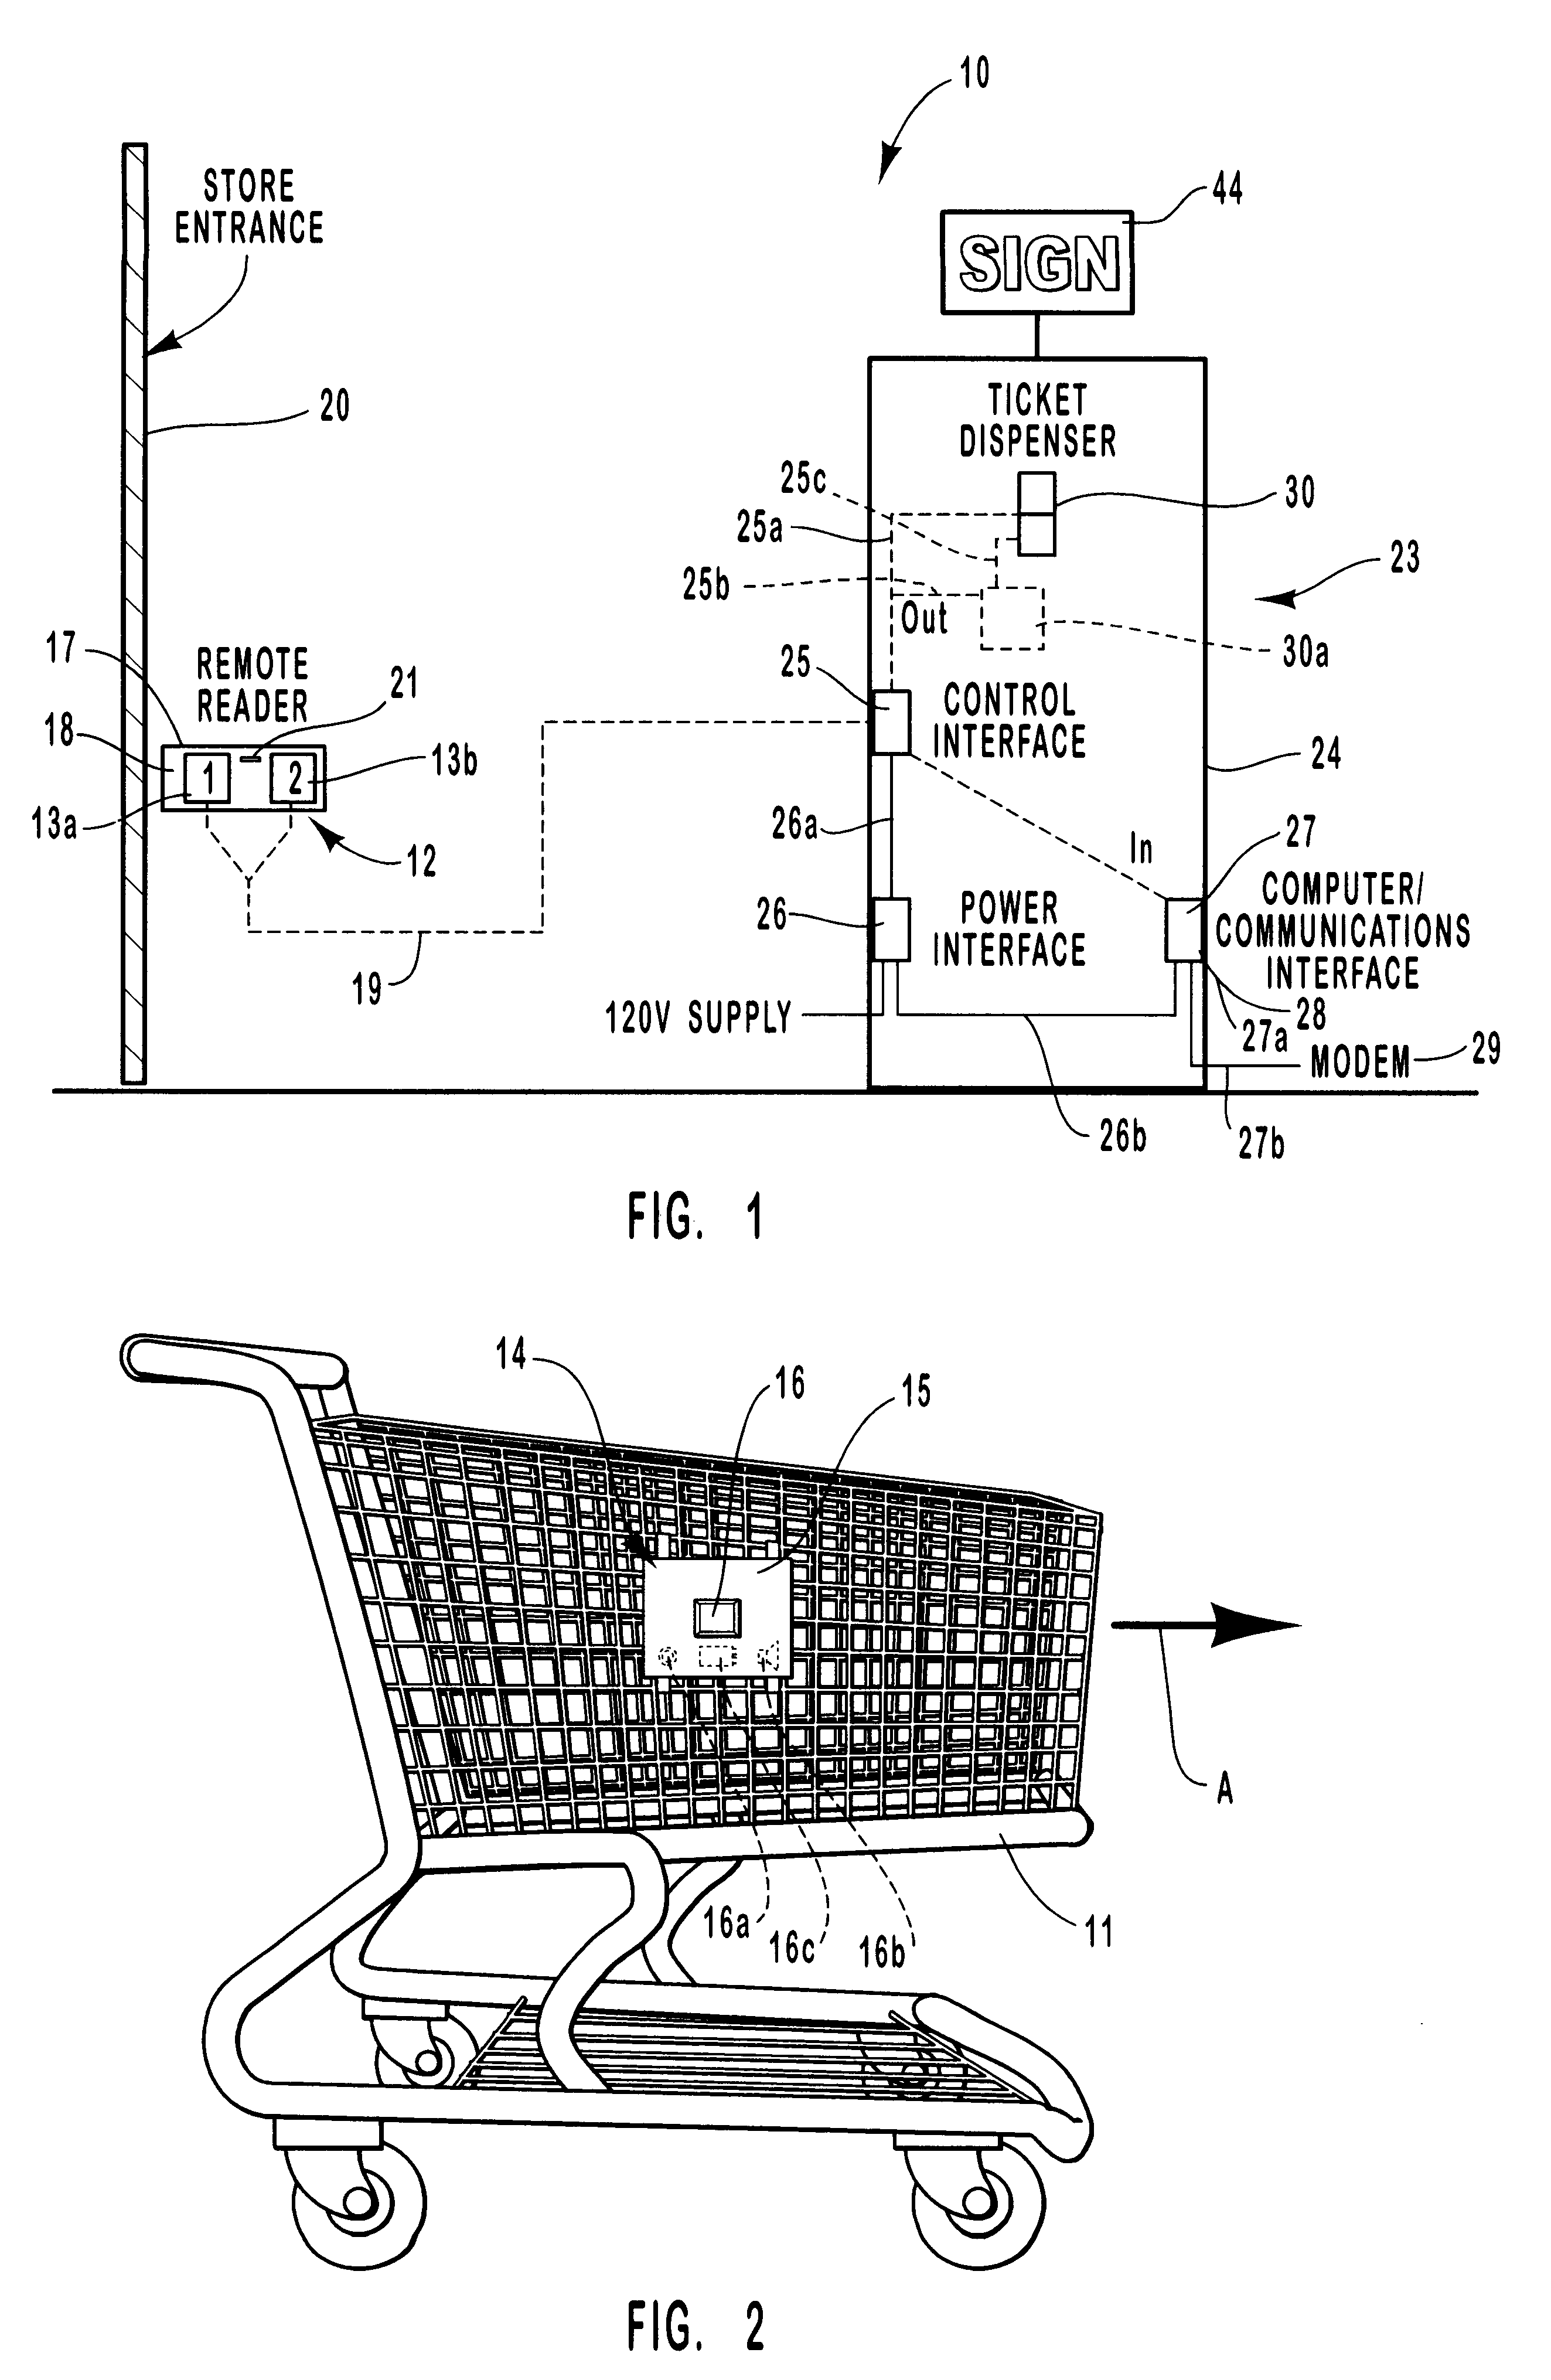 Detecting mechanism for a grocery cart and the like and system